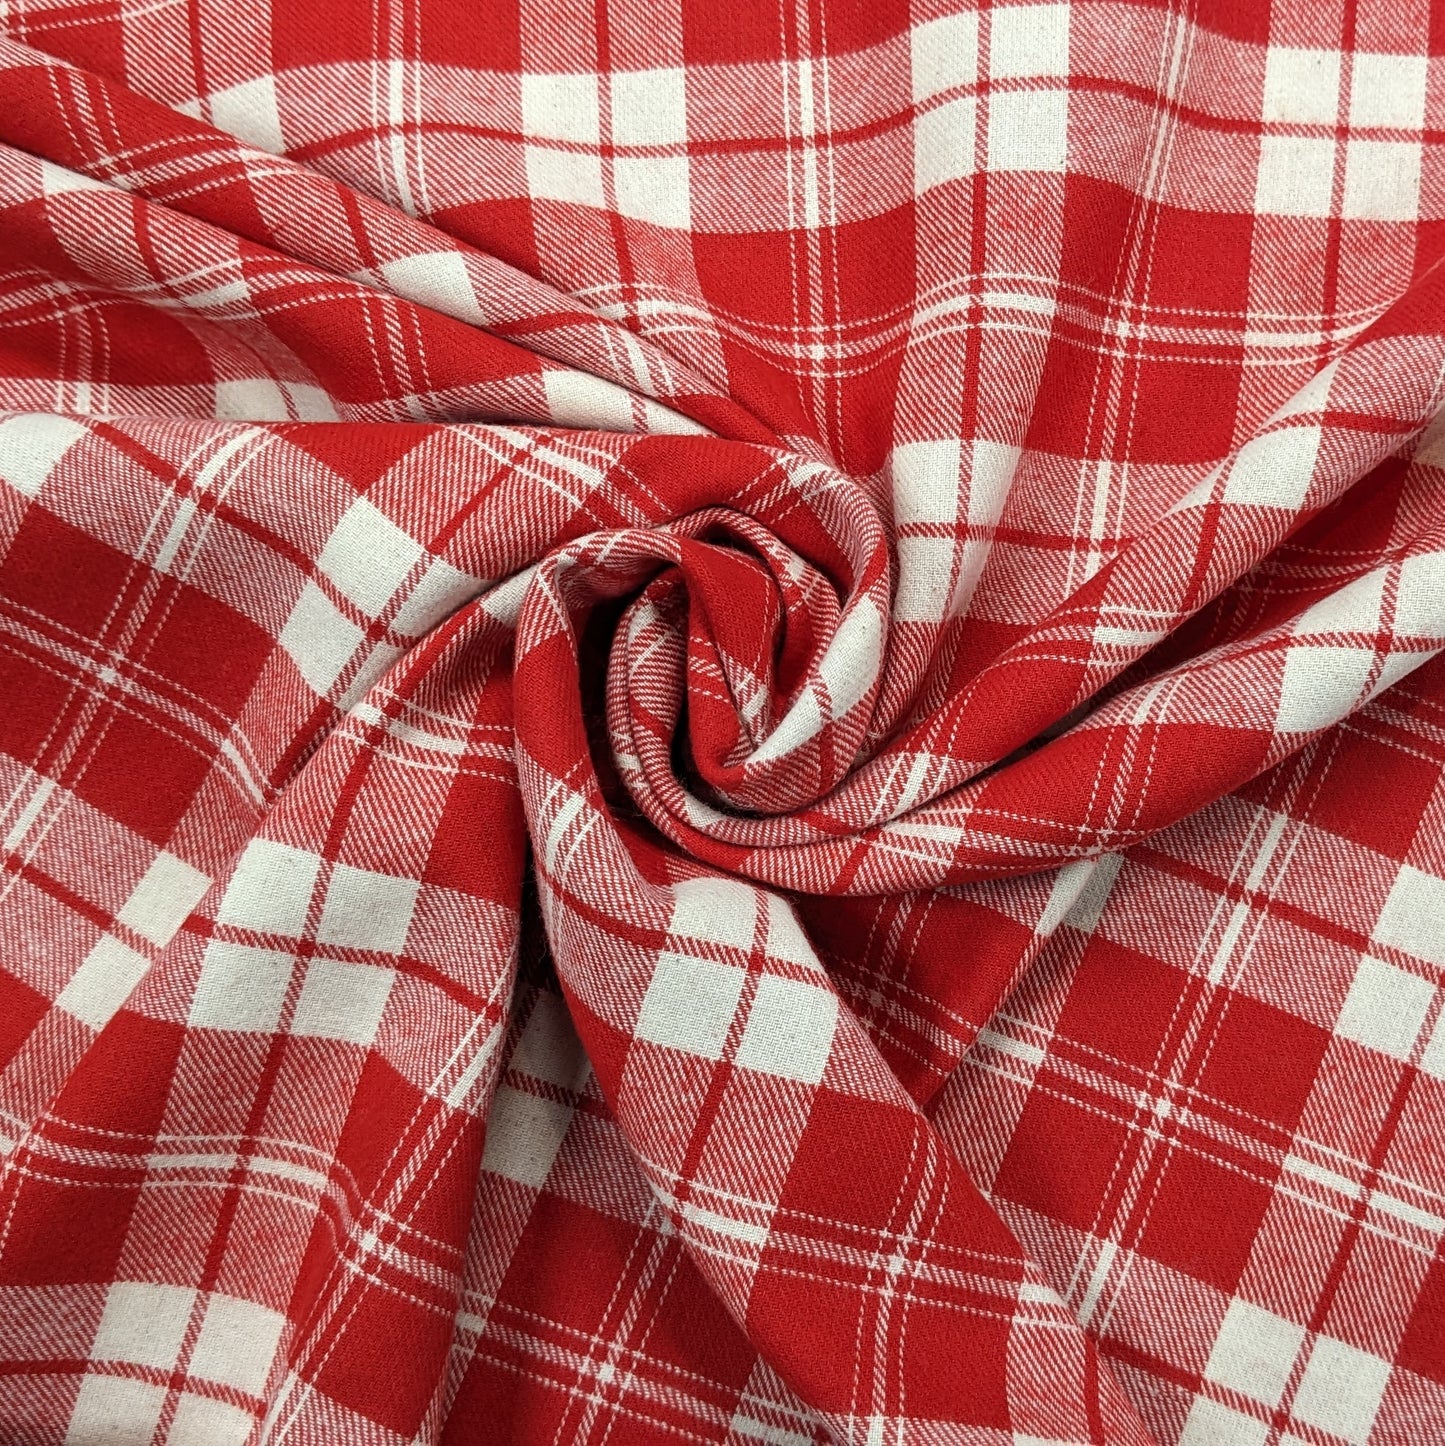 Brushed Cotton Fabric - Red and White Check - Tartan